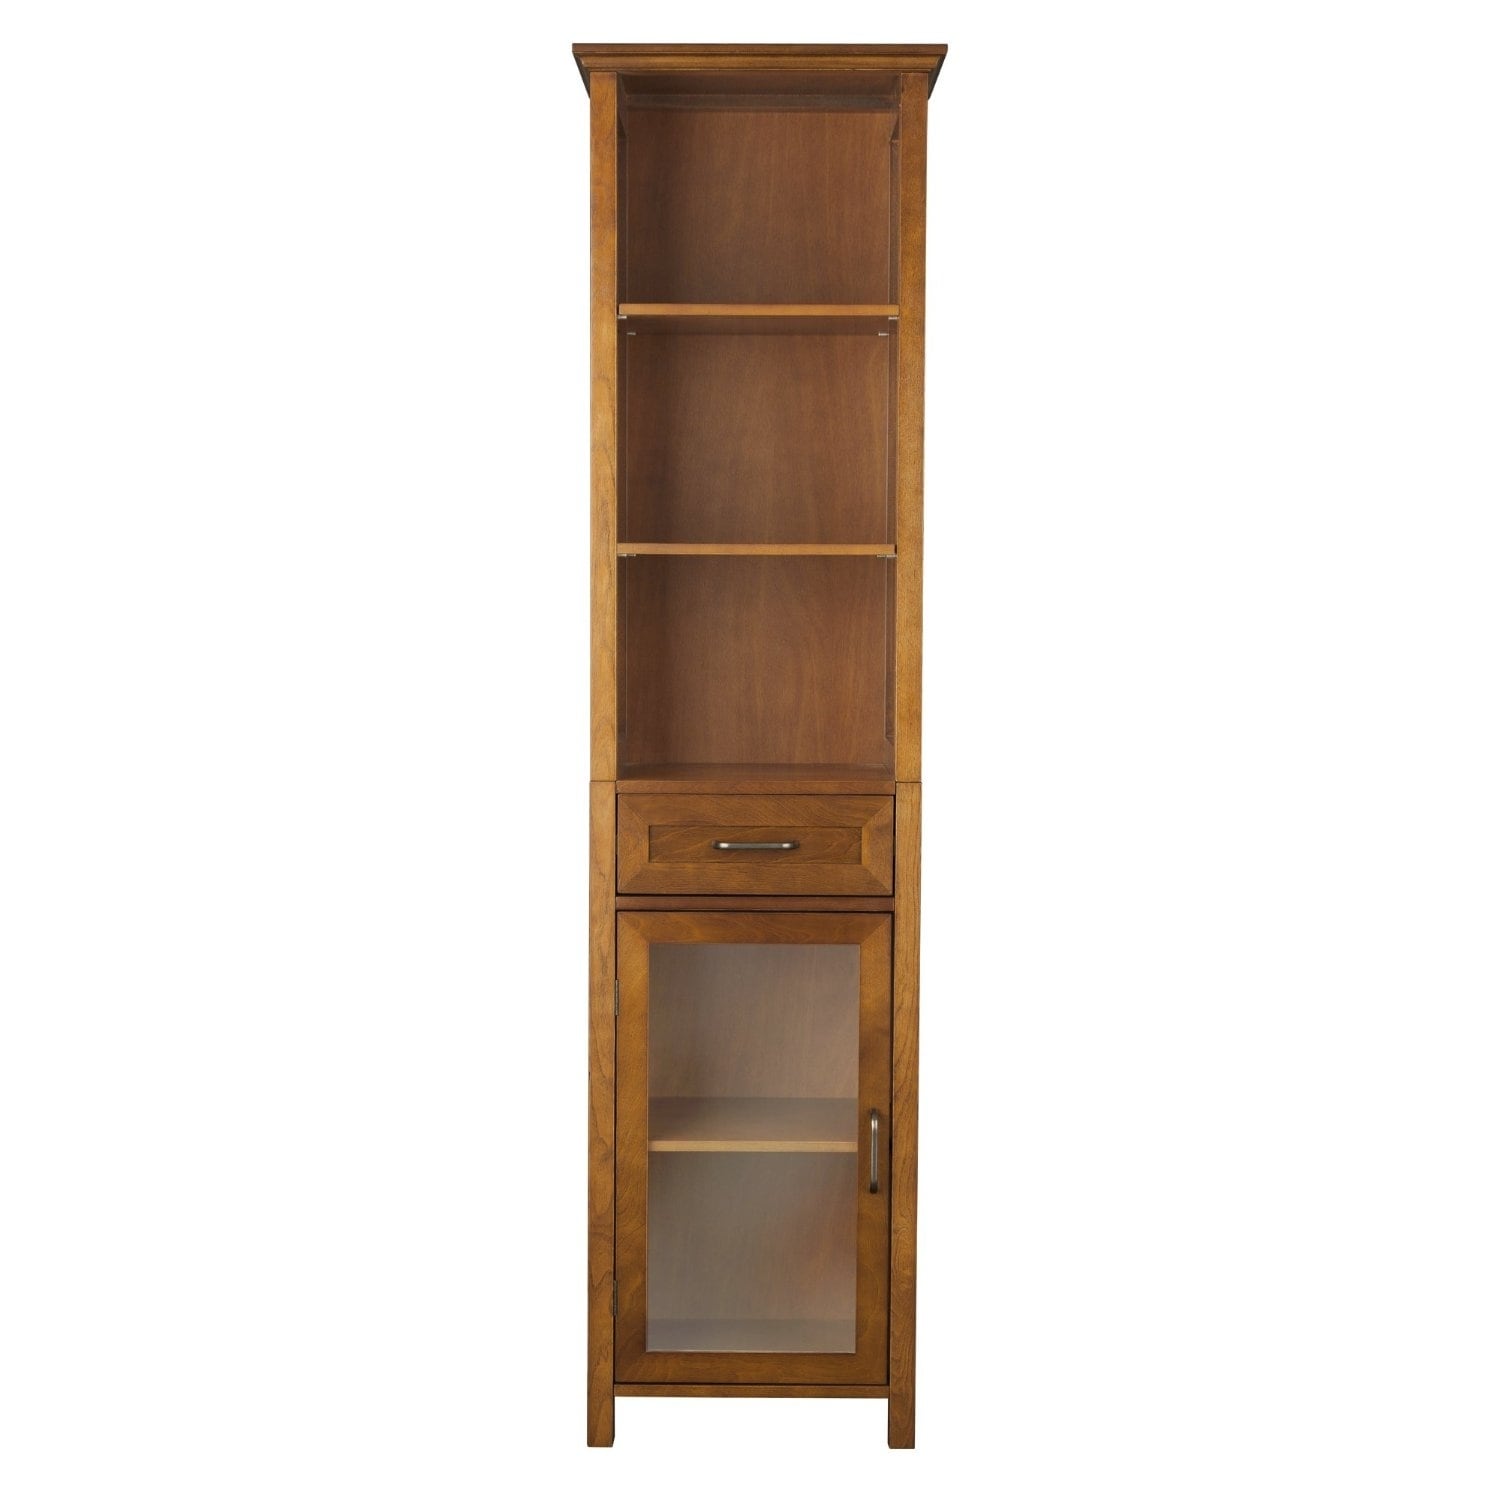 https://ak1.ostkcdn.com/images/products/is/images/direct/175d5db2ff23bb6fddaa7e4697052e12fe2703fc/Oak-Finish-Bathroom-Linen-Tower-Storage-Cabinet-with-Shelves.jpg